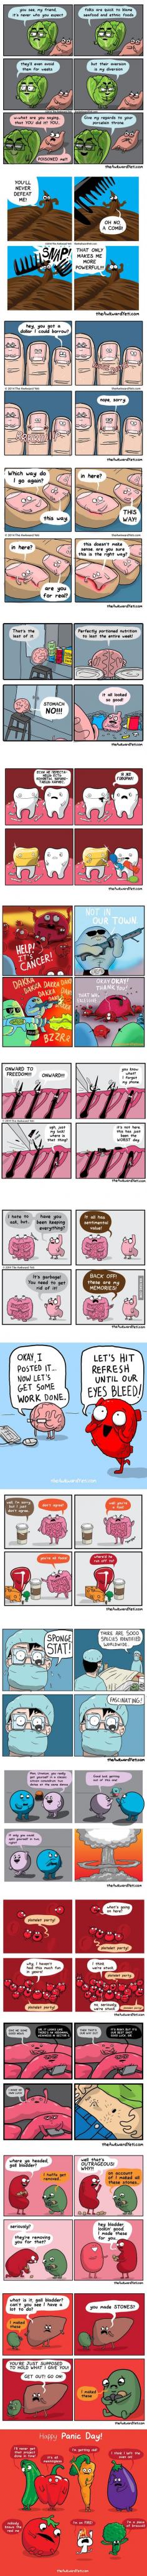 Some of The Awkward Yeti Comics. The tooth one is the tooth saying something like If you keep eating all those sweets youll get a cavity! and then I told you so! - more funny things: http://hotfunnystuff.com